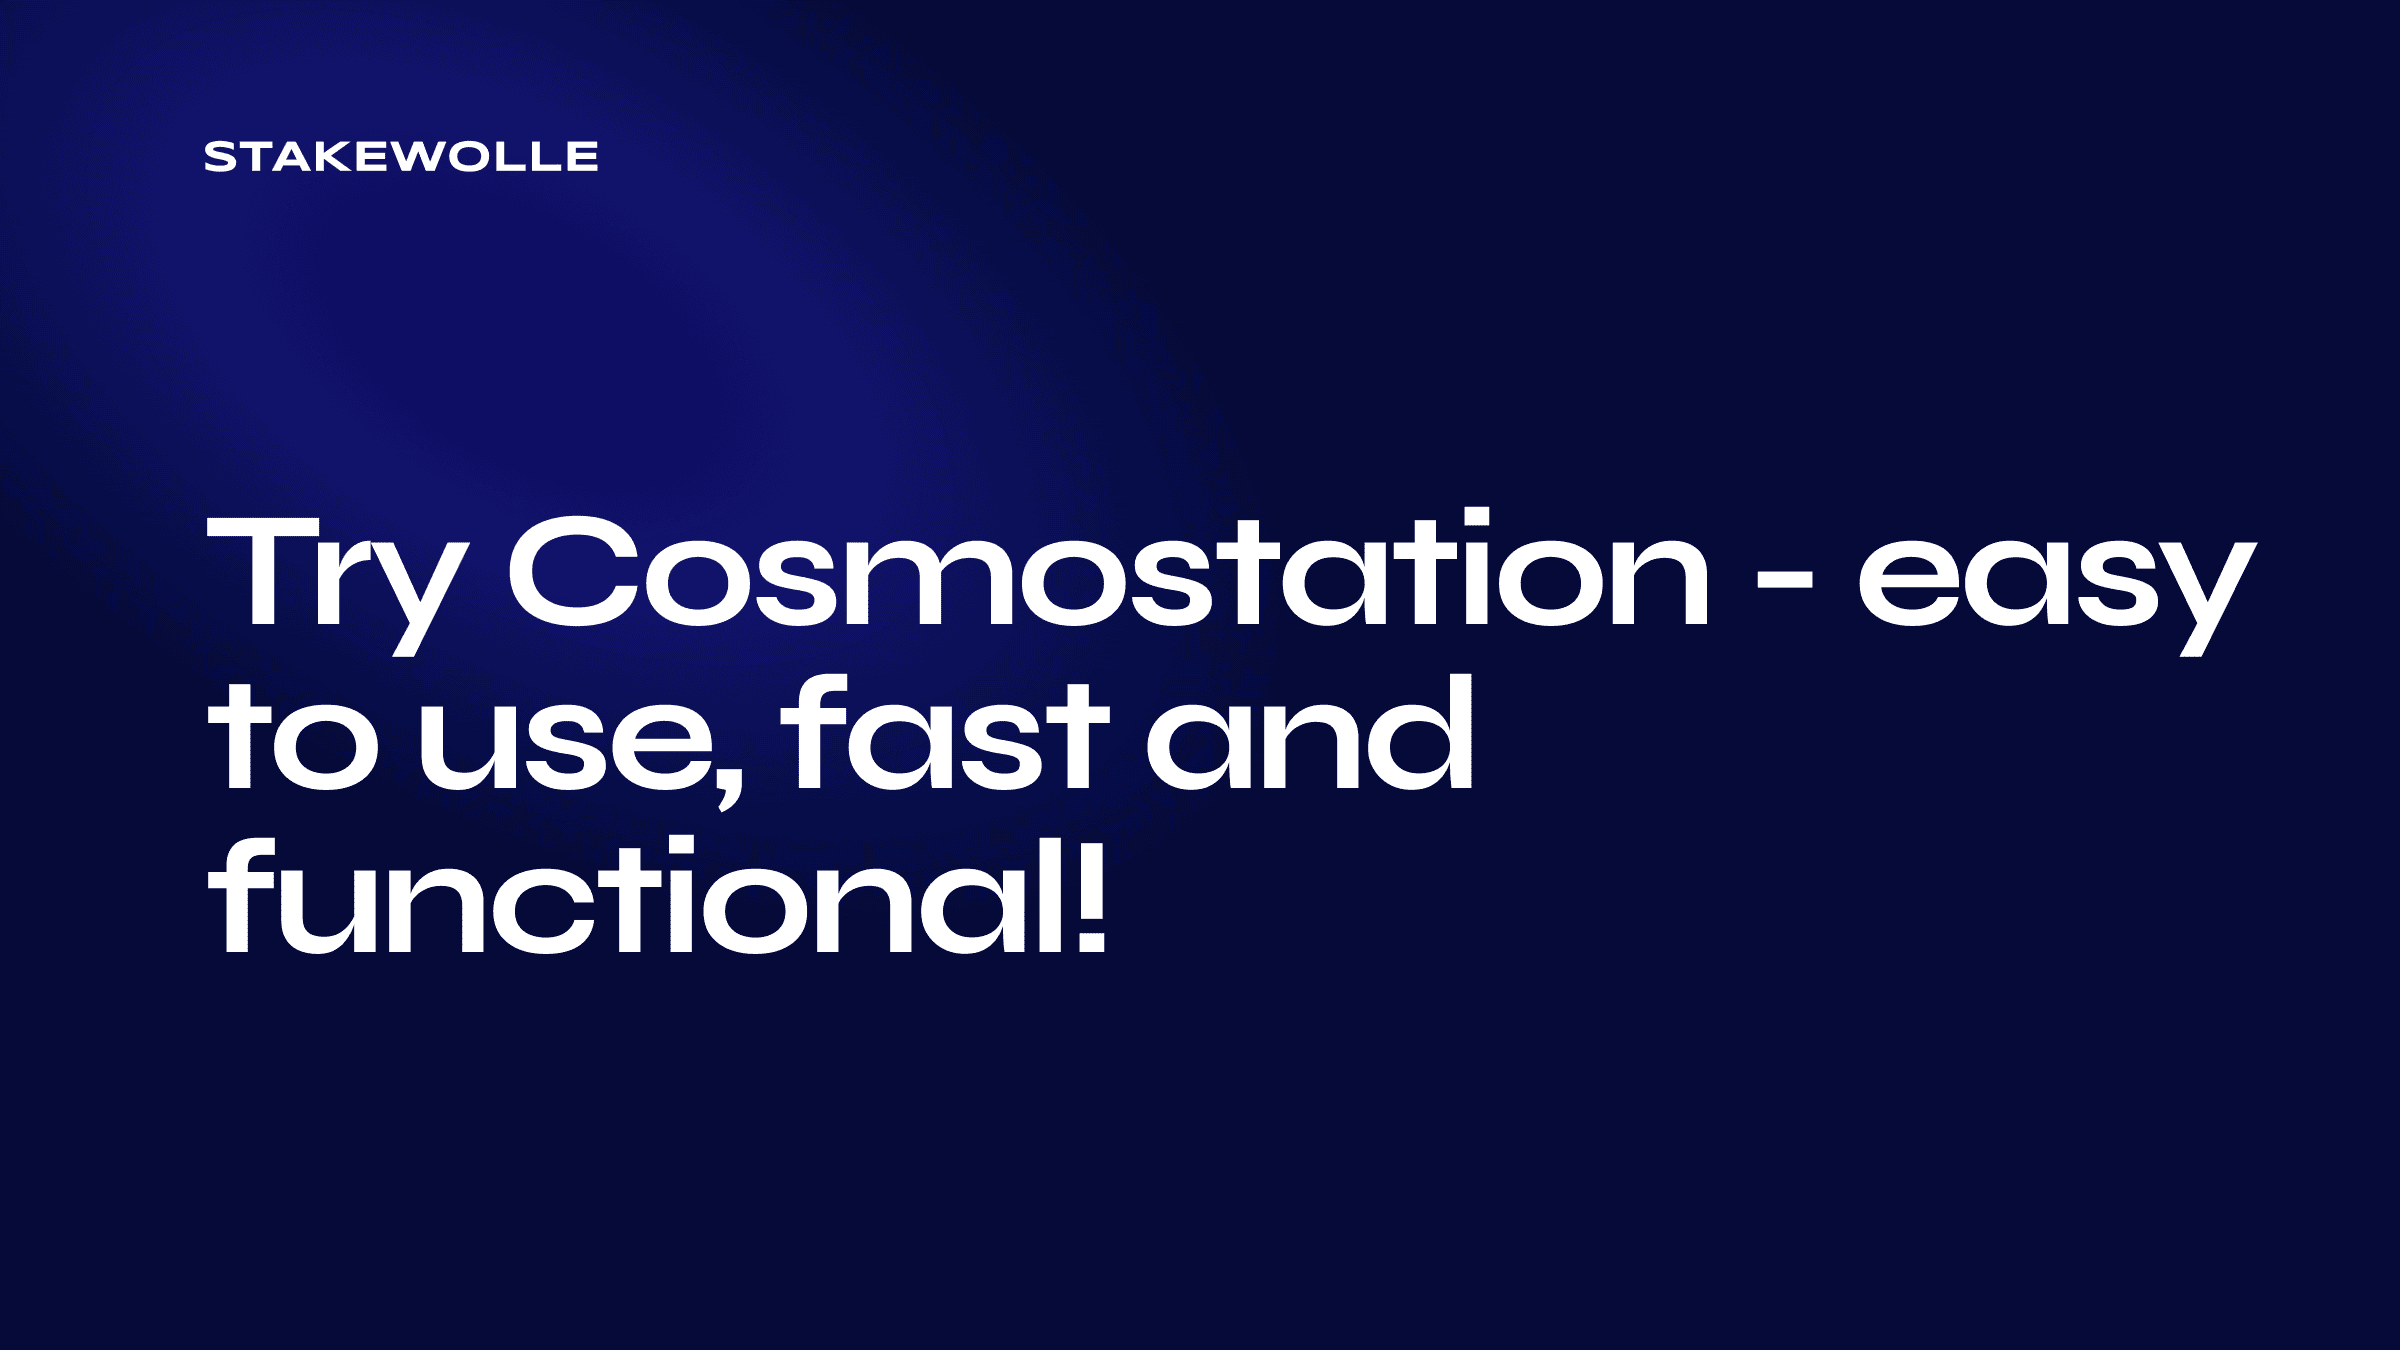 Try Cosmostation - easy to use, fast and functional!